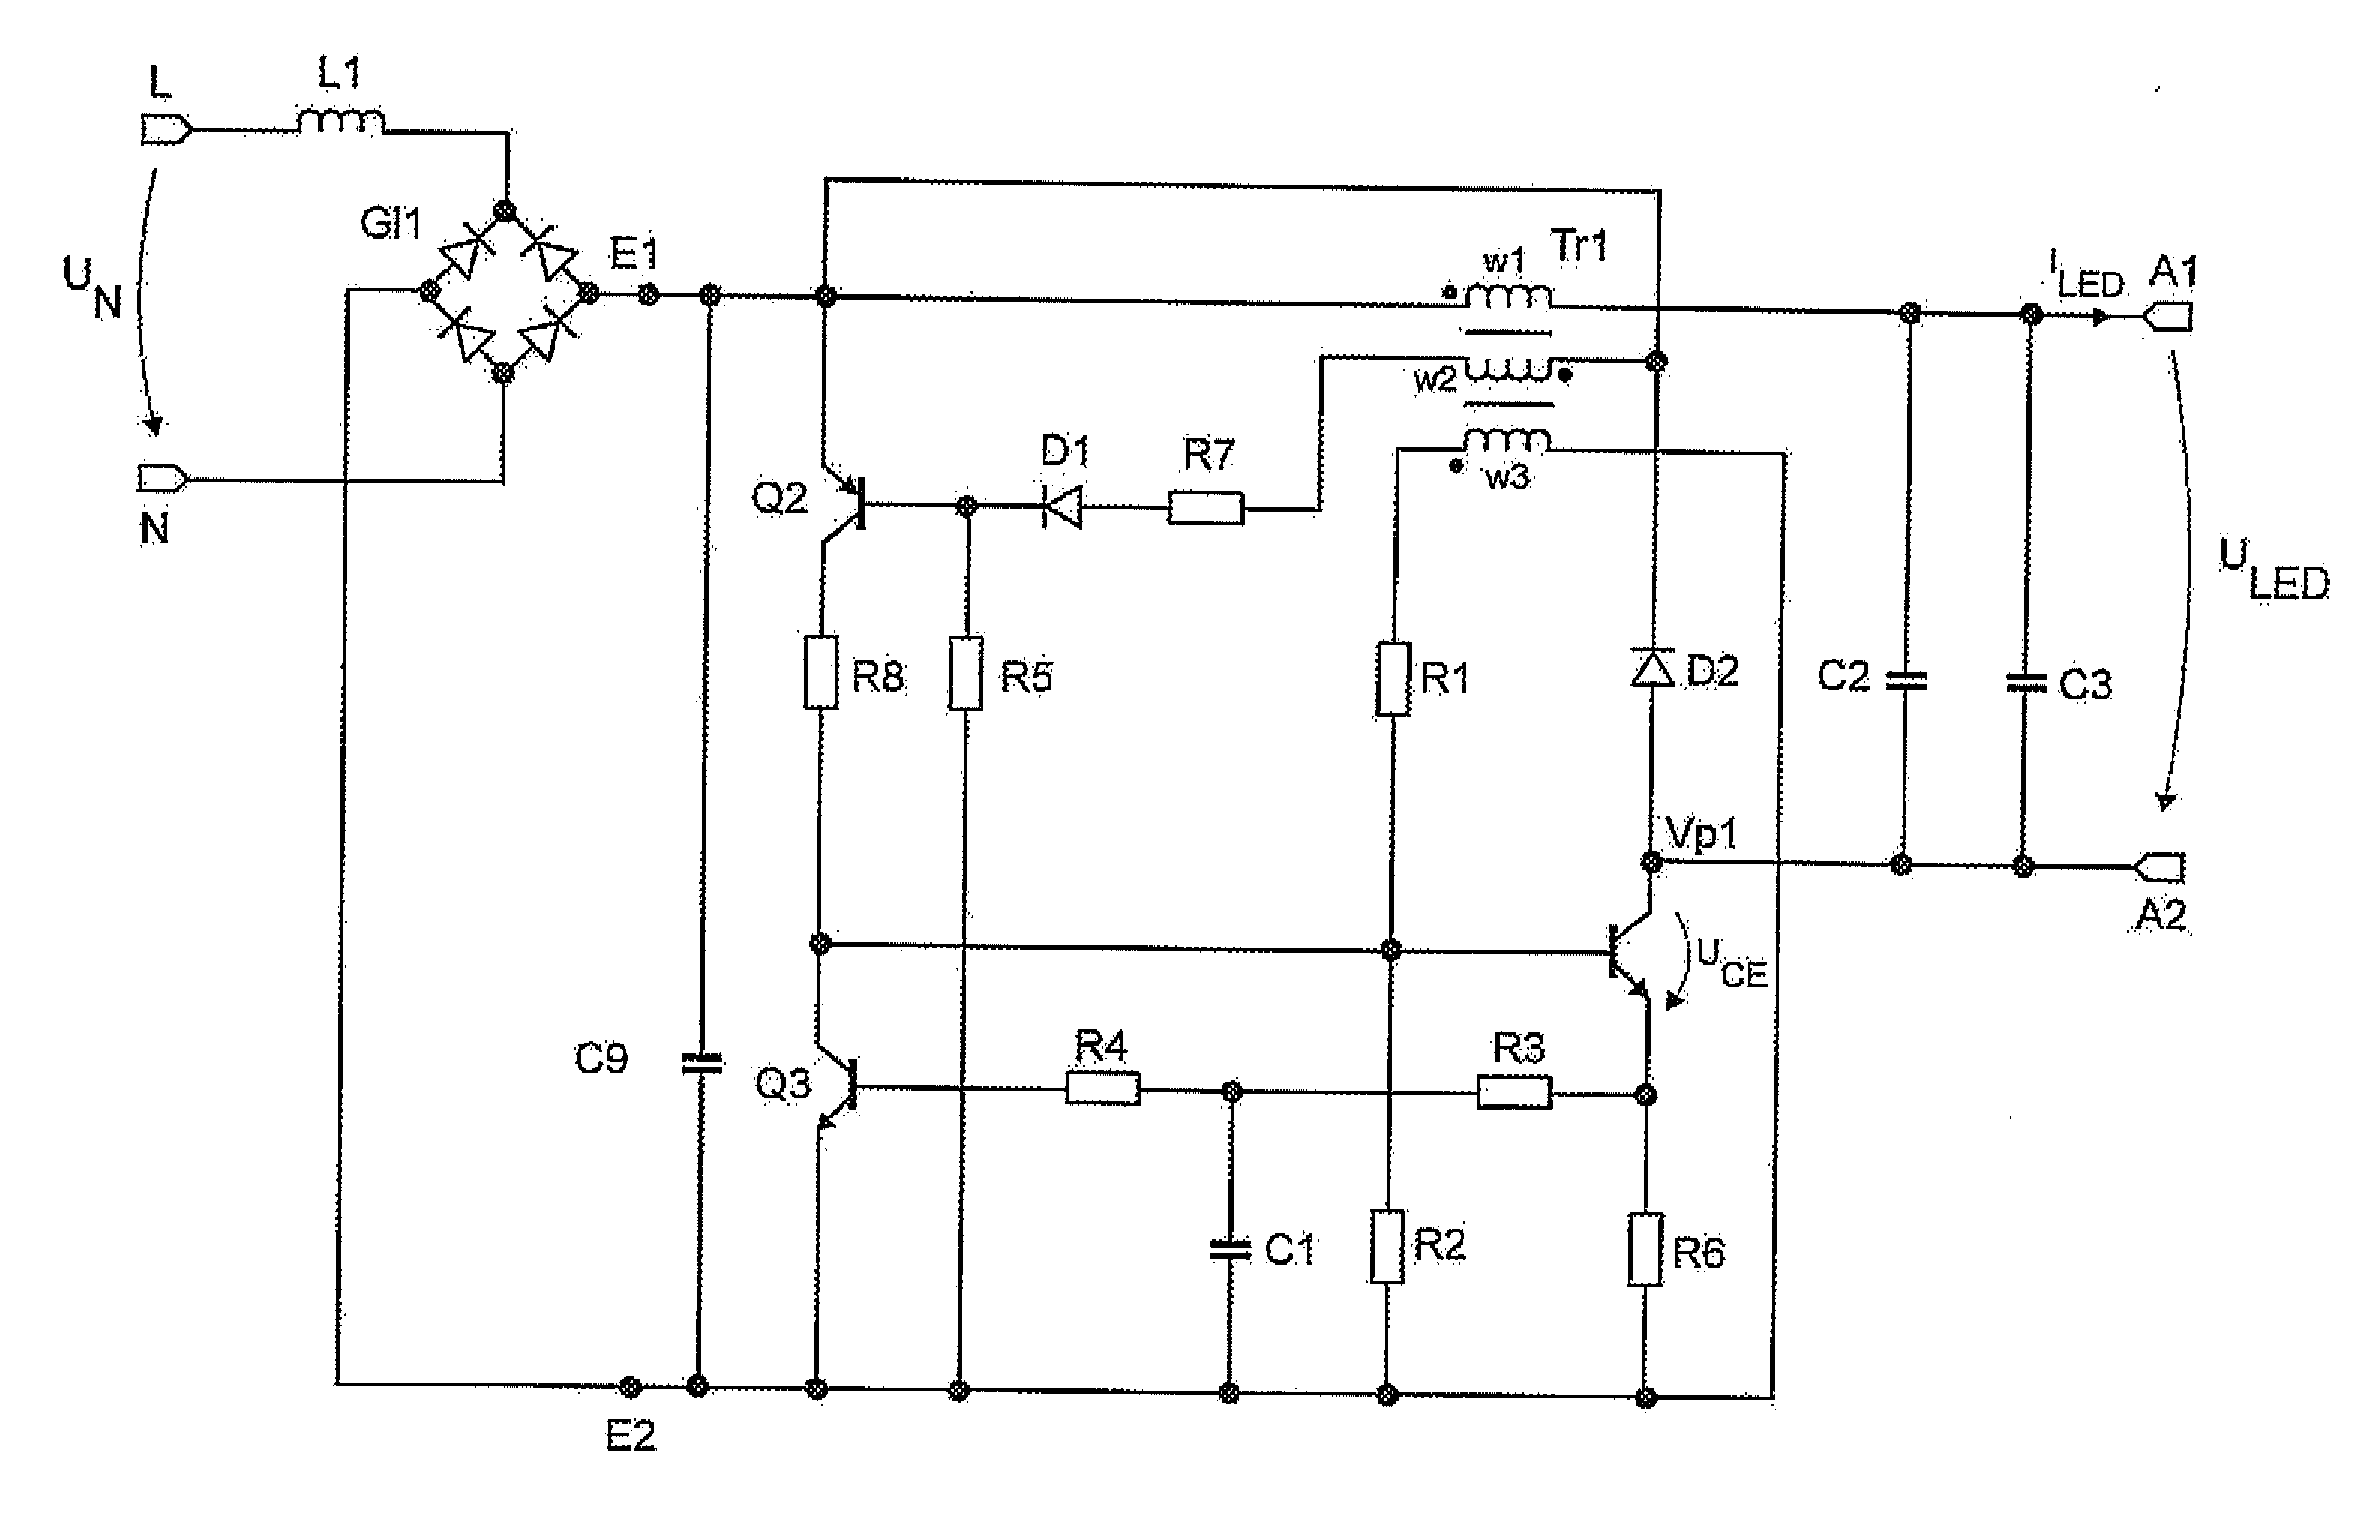 Buck converter for making power available to at least one LED